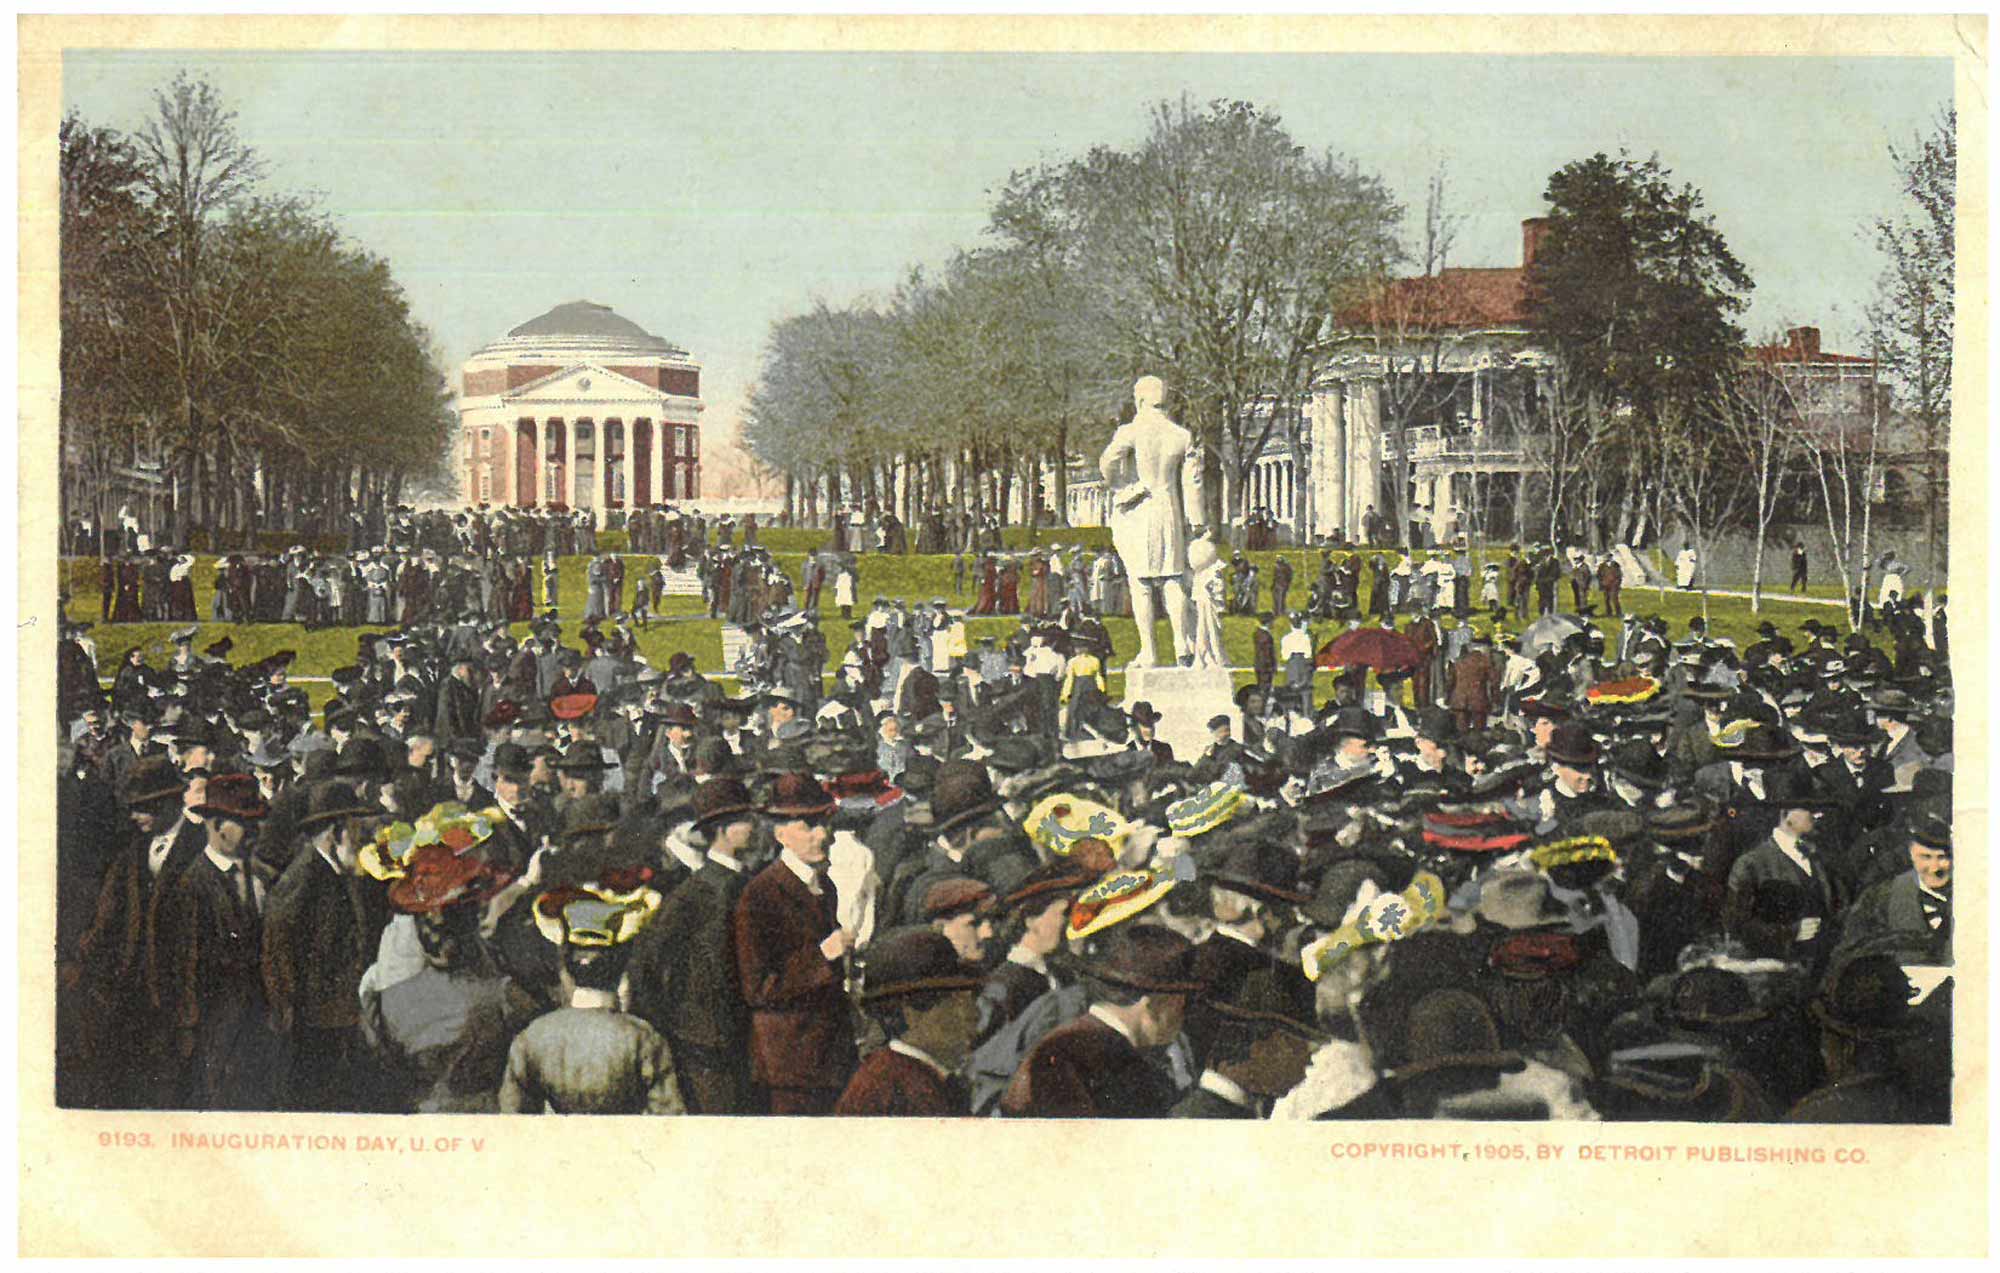 An illustration of a very old picture featuring the UVA Rotunda in the background, with a crowd on the lawn and a stone statue of James Monroe.